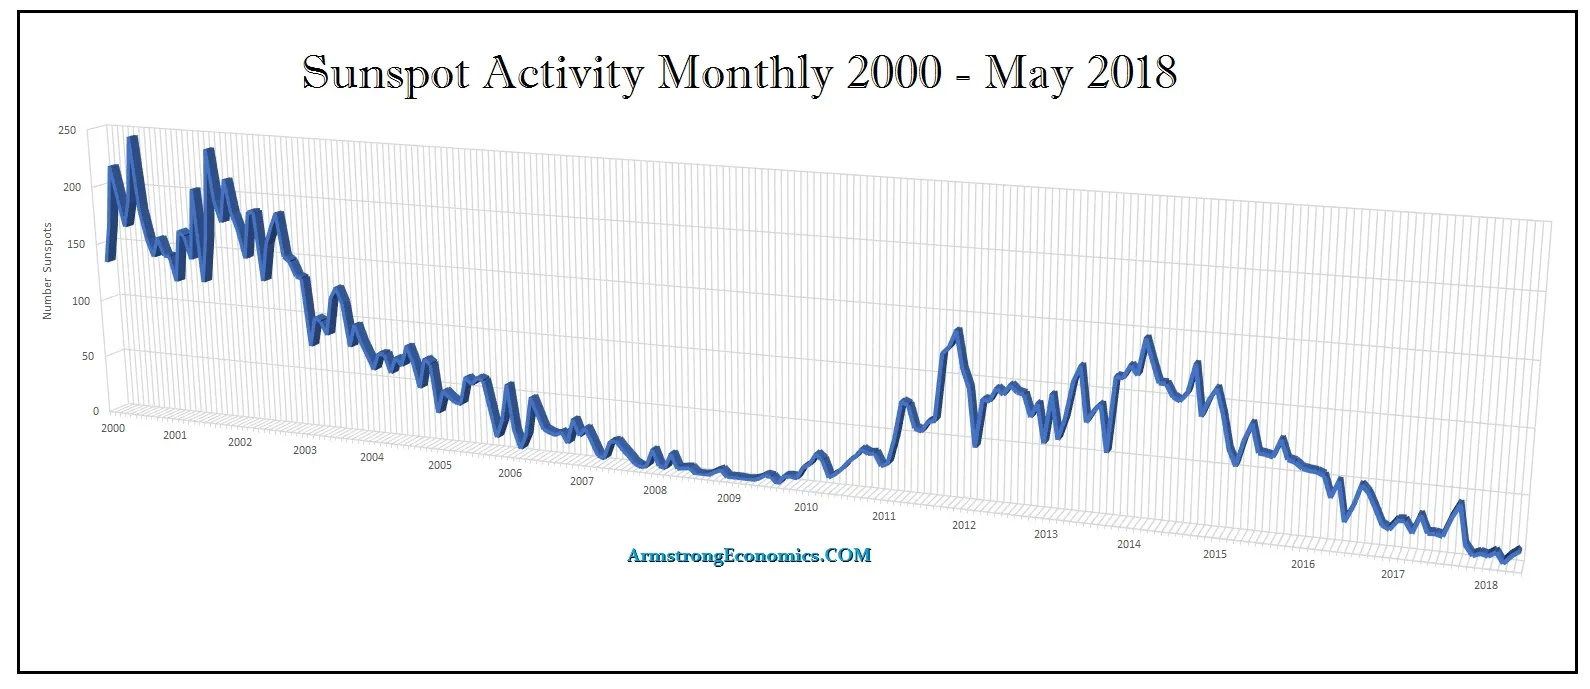 Armstrong Economics Sunspot Monthly Data 2000 05 2018